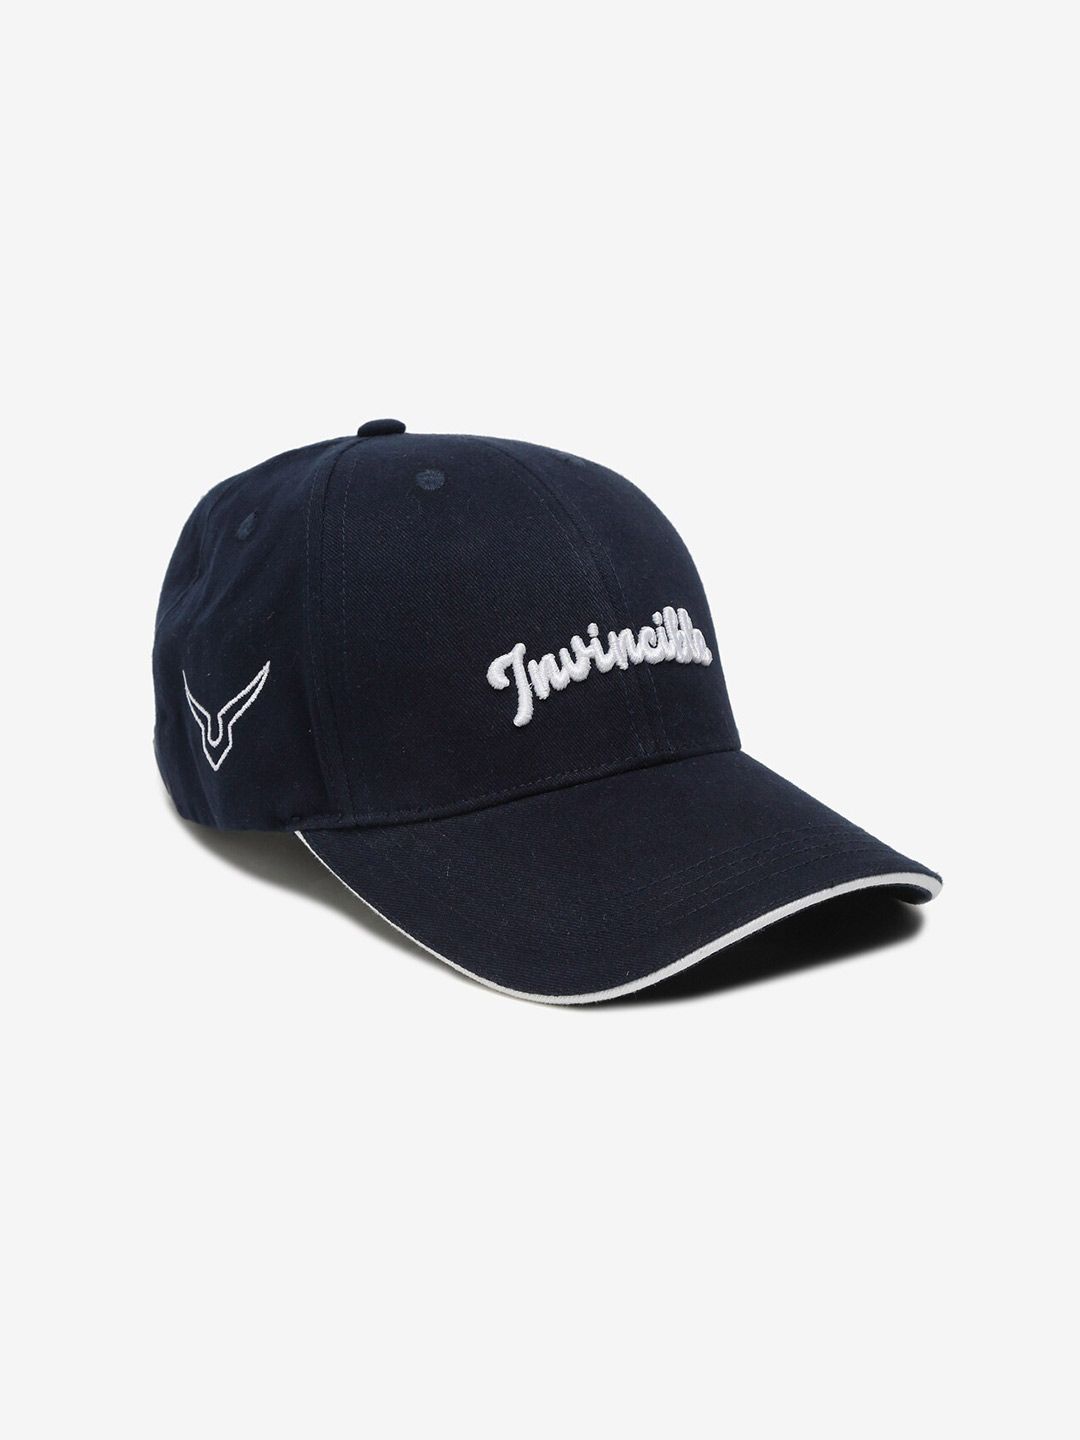 Invincible Adult Navy Blue & White Baseball Cap Price in India